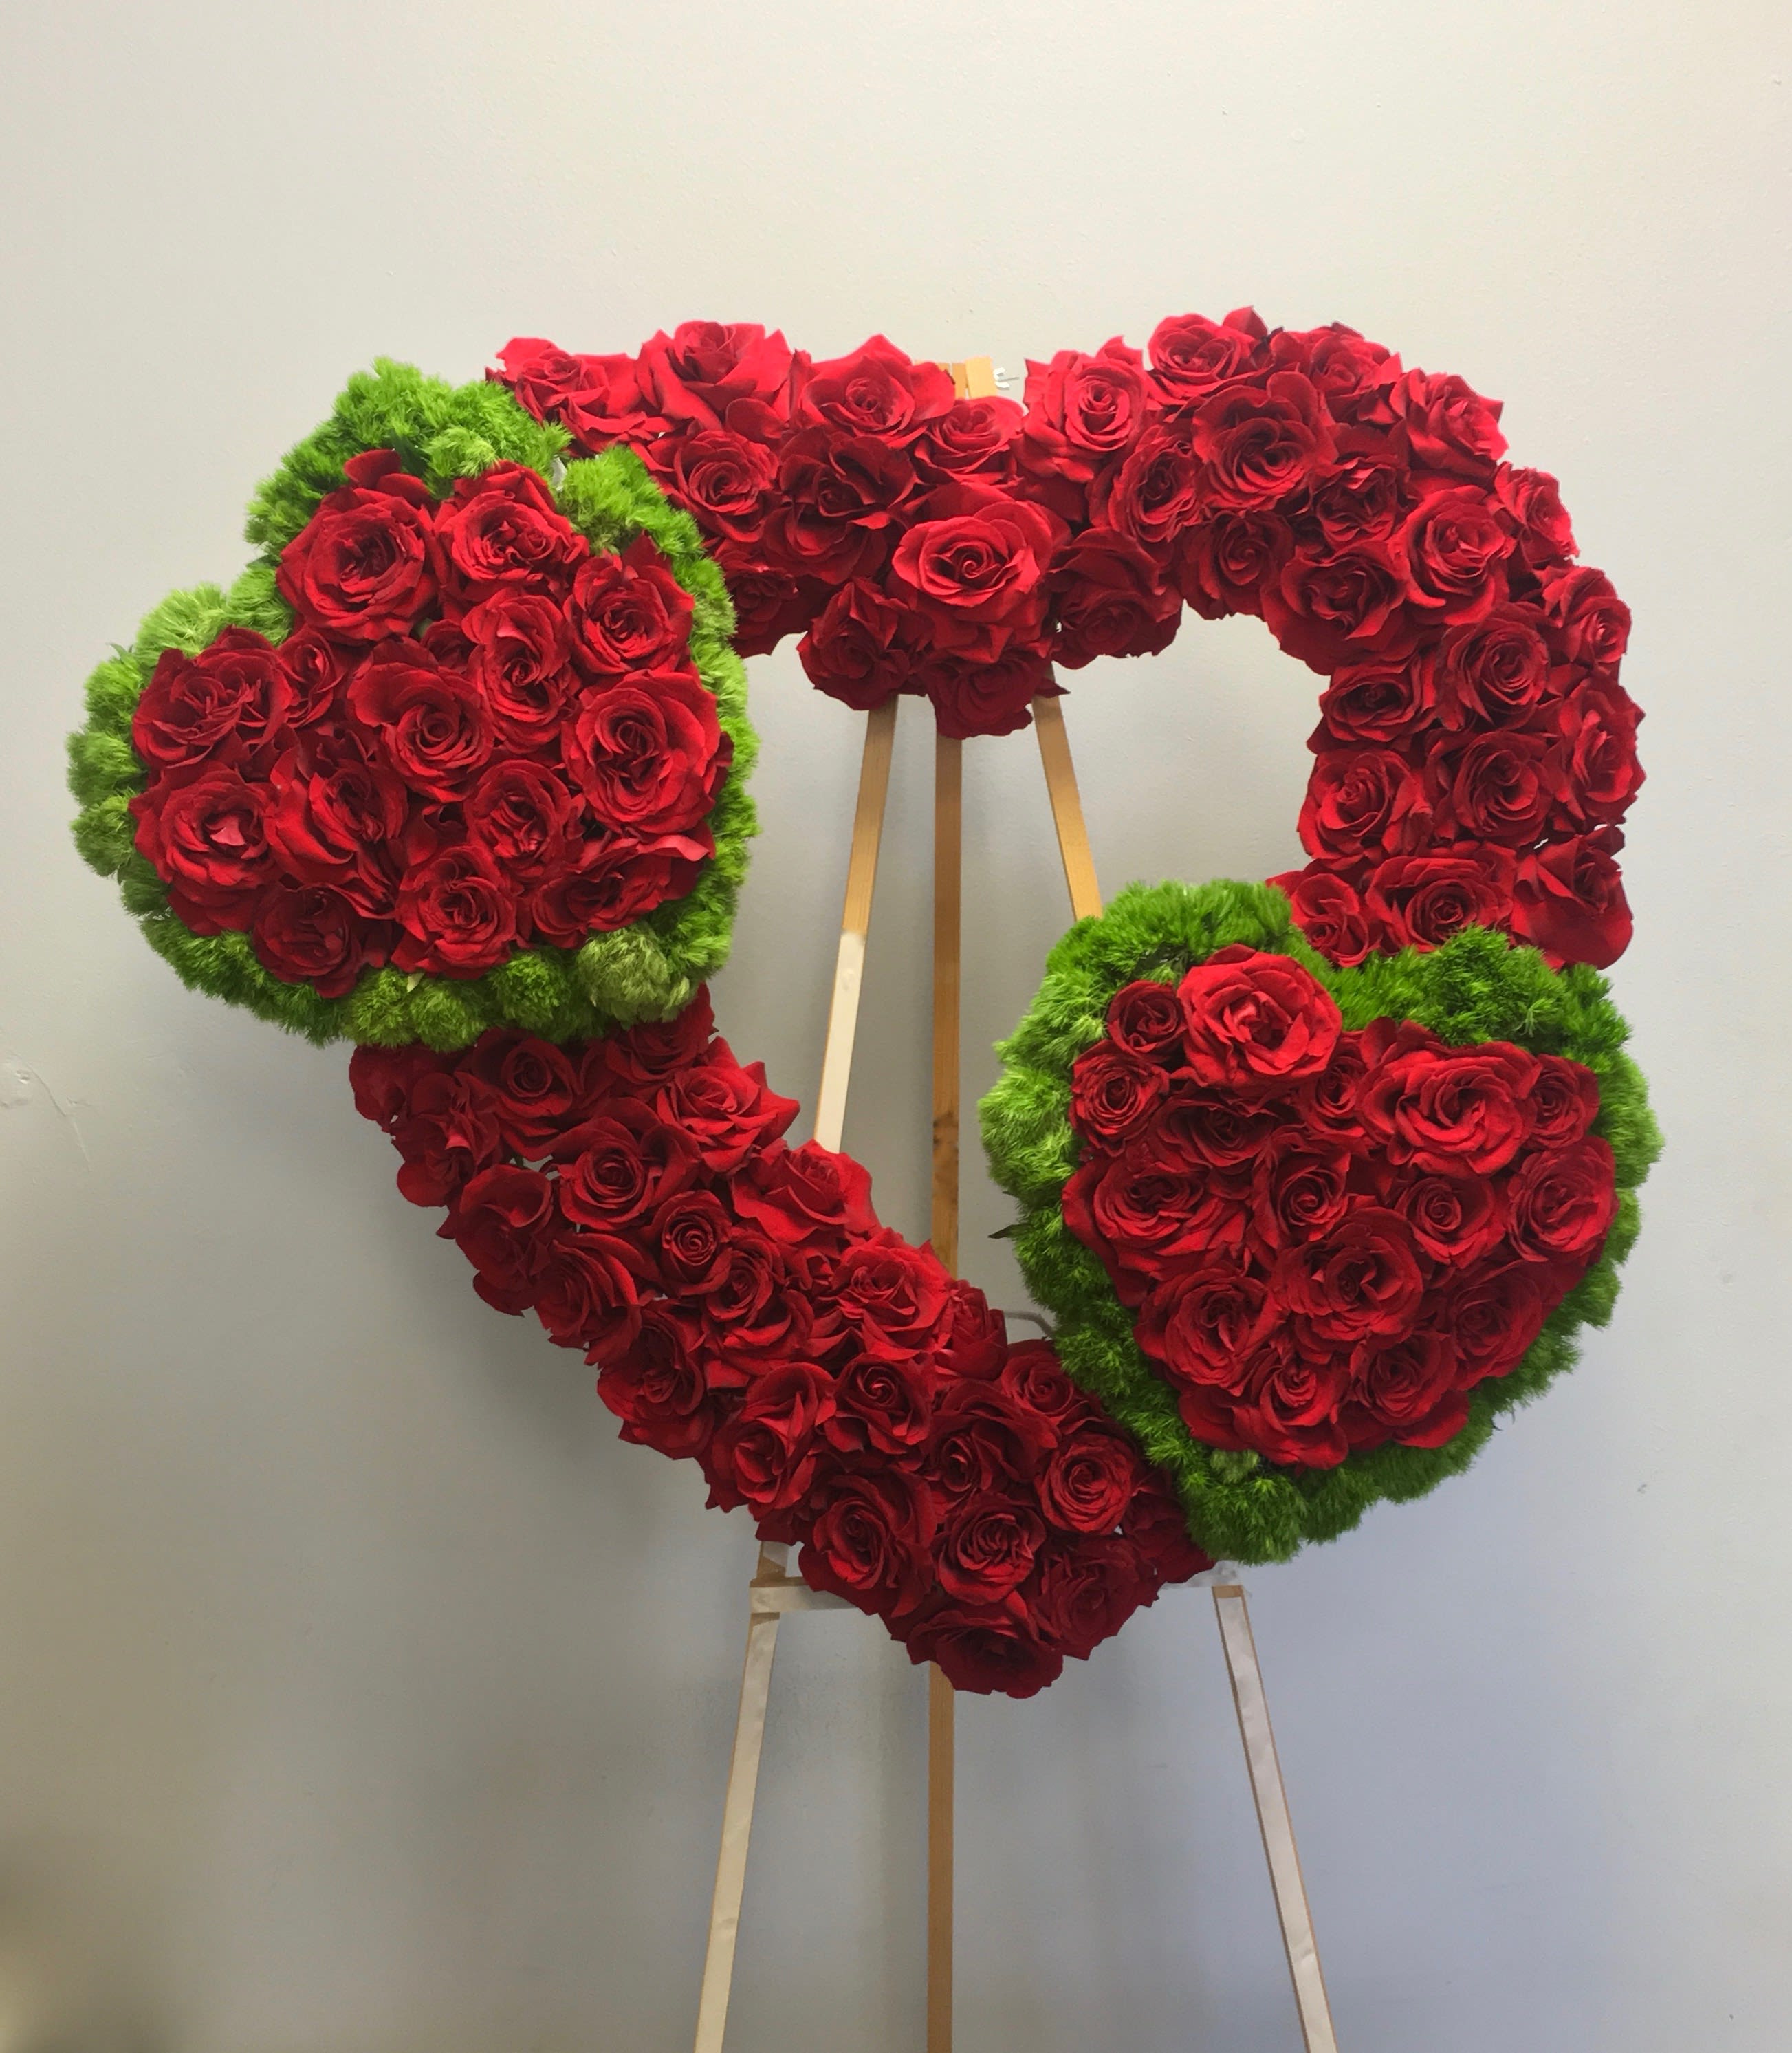 Triple Heart  - Three hearts in one, all containing red roses. The two smaller hearts are outlines in fluffy seasonal greens.   We include easel, printed banner and delivery (some fees may apply).  Standard size is 30'', deluxe is 36'', and premium is 42''. 